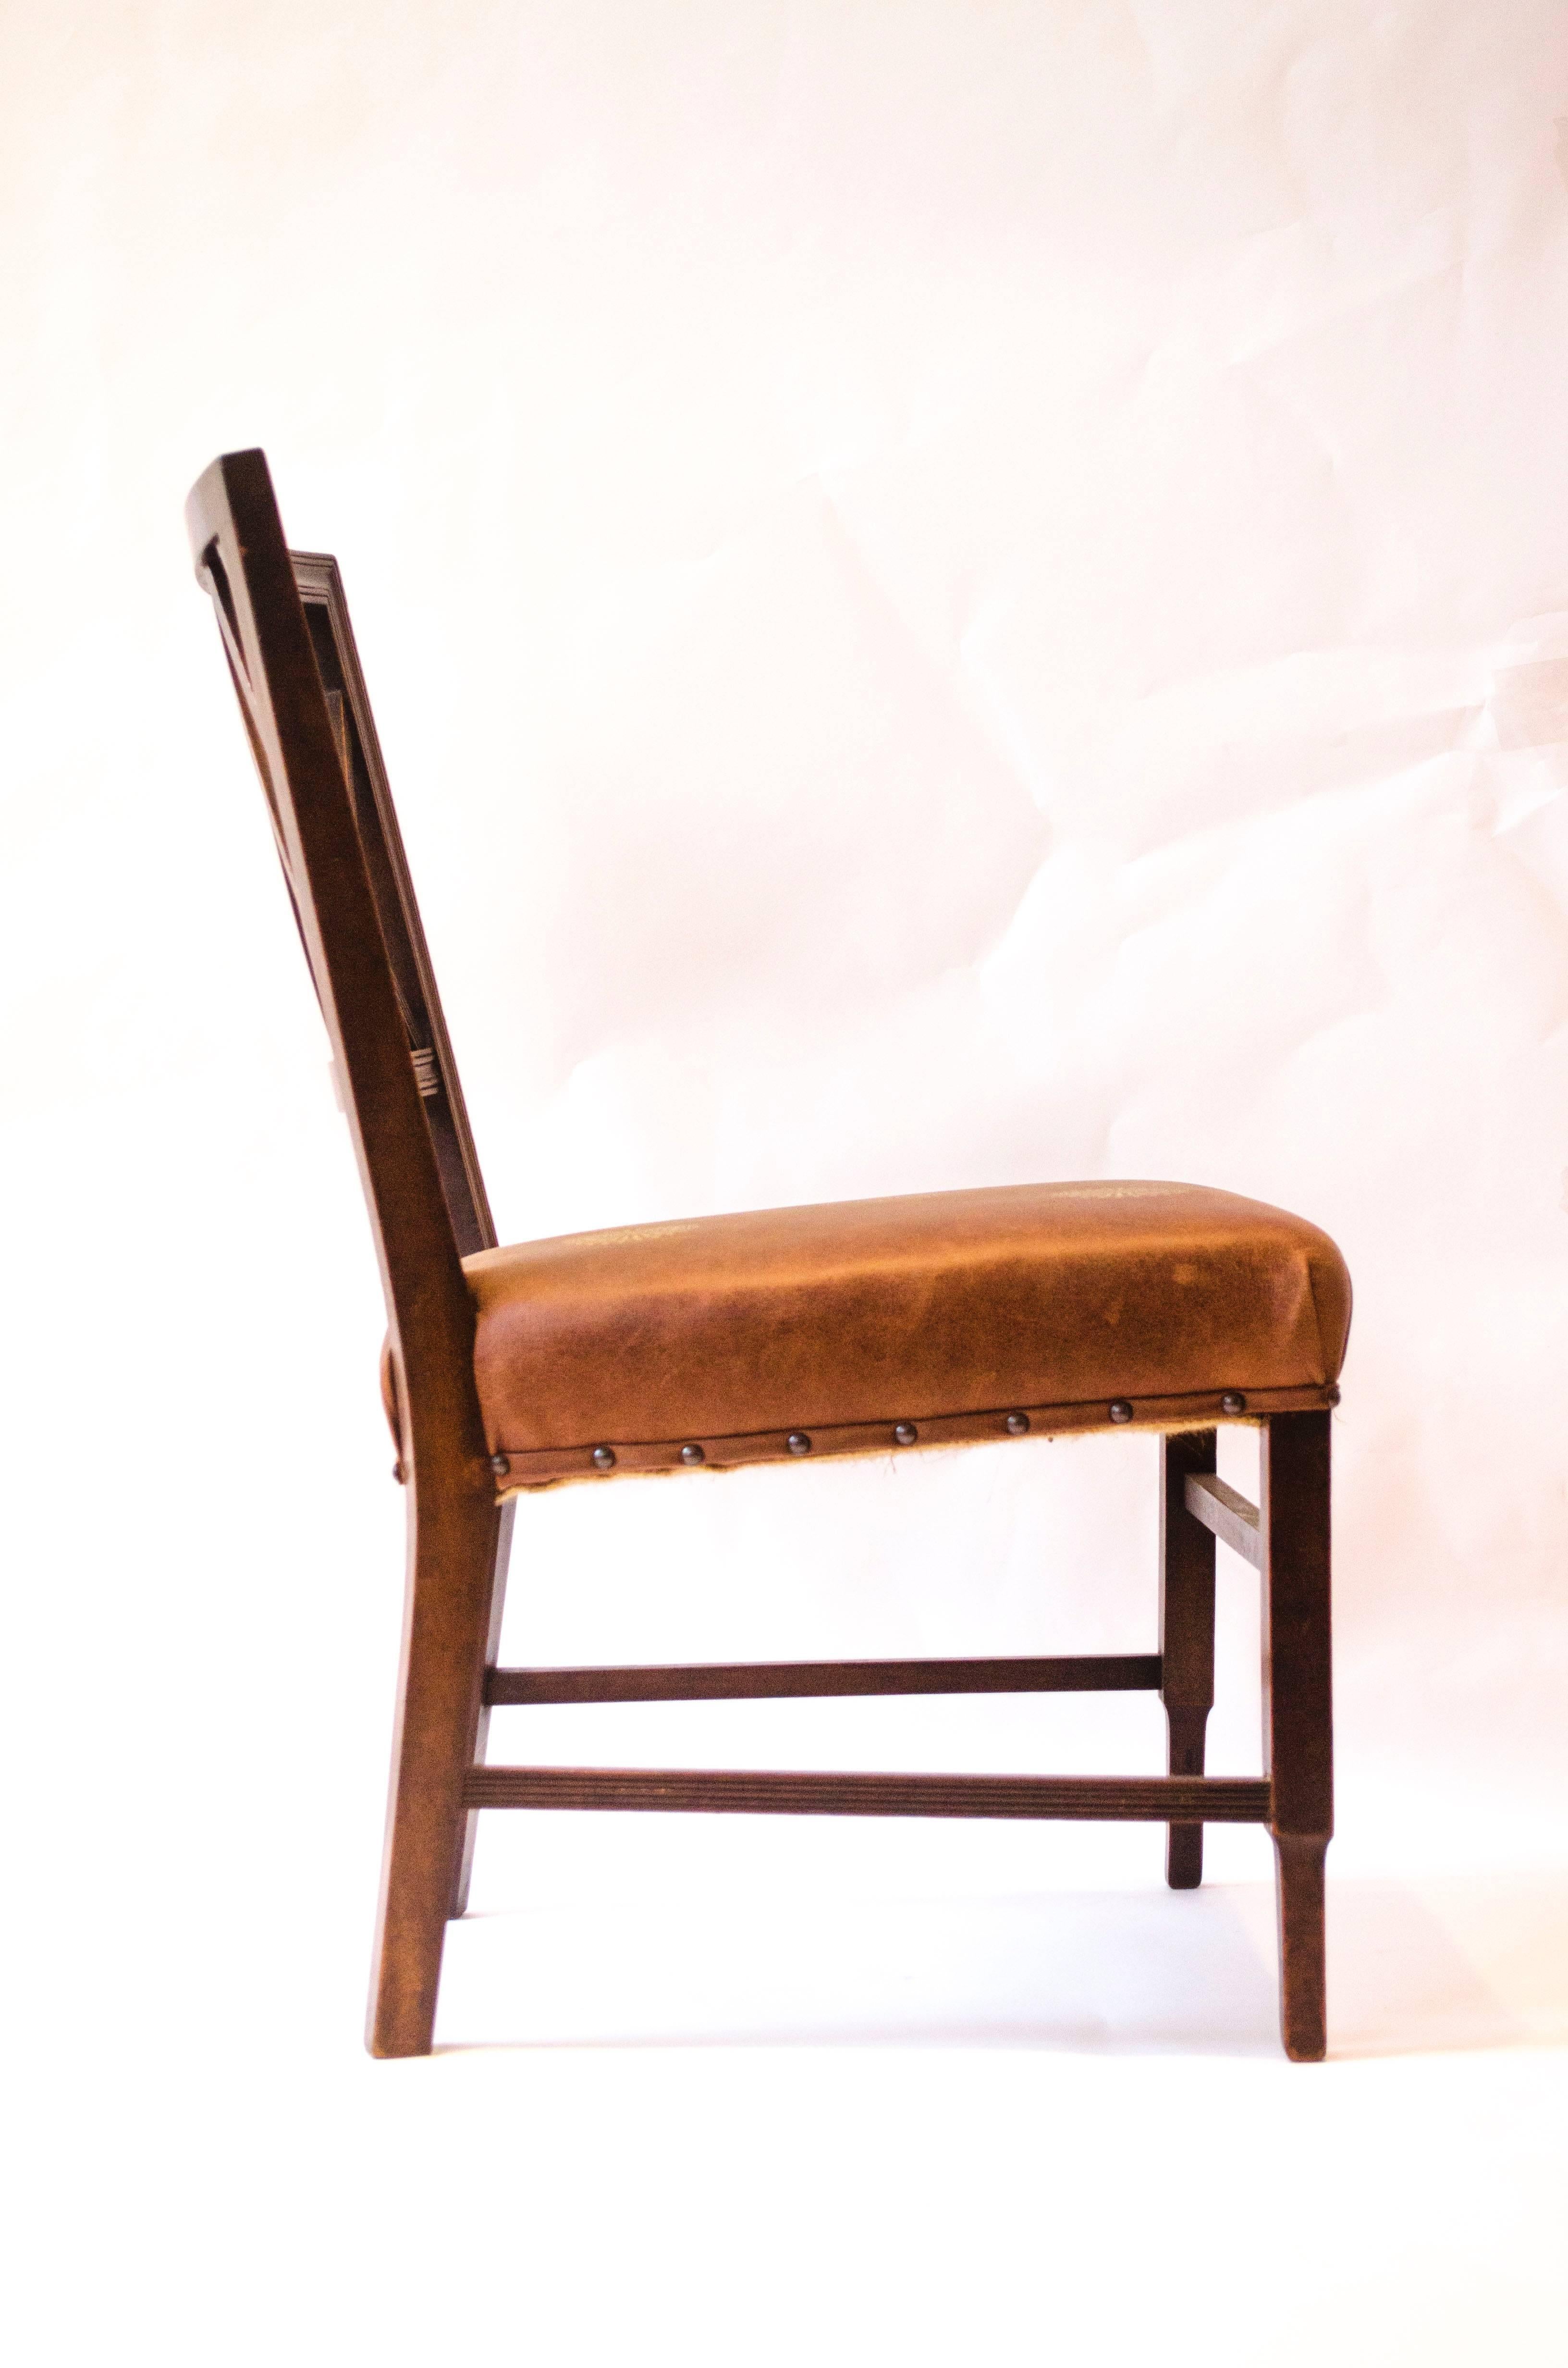 Edward William Godwin (attributed), an Anglo-Japanese walnut side chair, circa 1875, probably by William Watt. With a lattice back, a later overstuffed gilt embossed leather seat, on square part-fluted supports. 
See Soros, Susan Weber 'The Secular